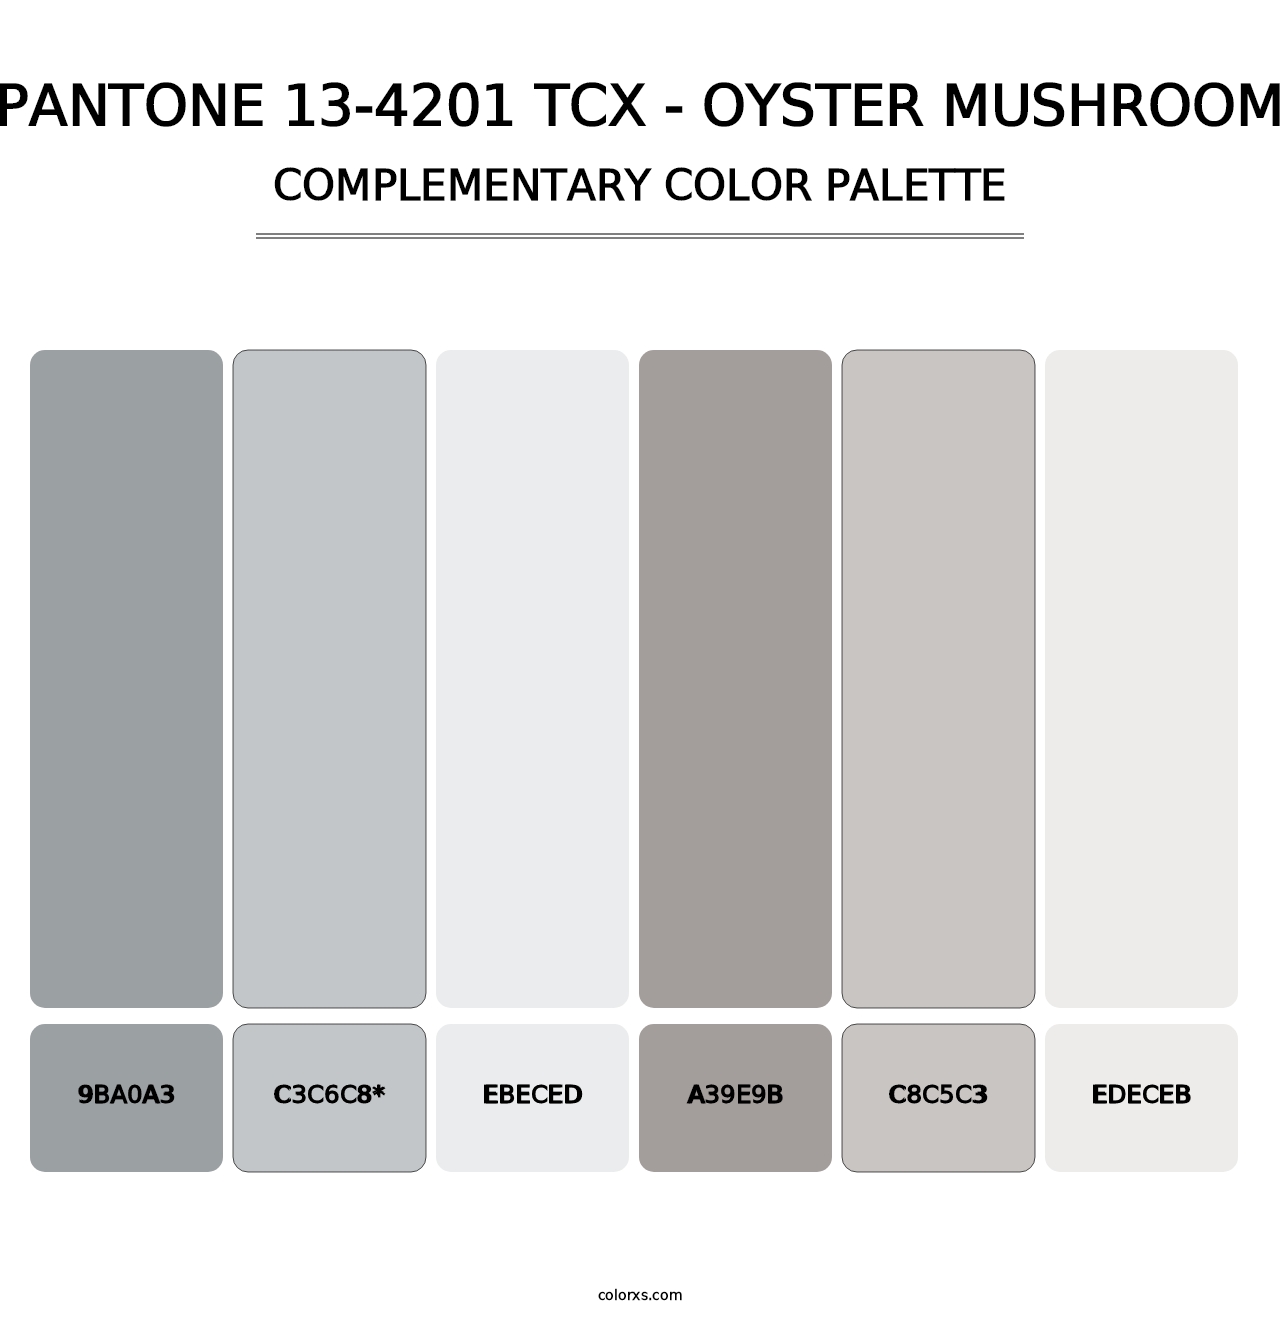 PANTONE 13-4201 TCX - Oyster Mushroom - Complementary Color Palette